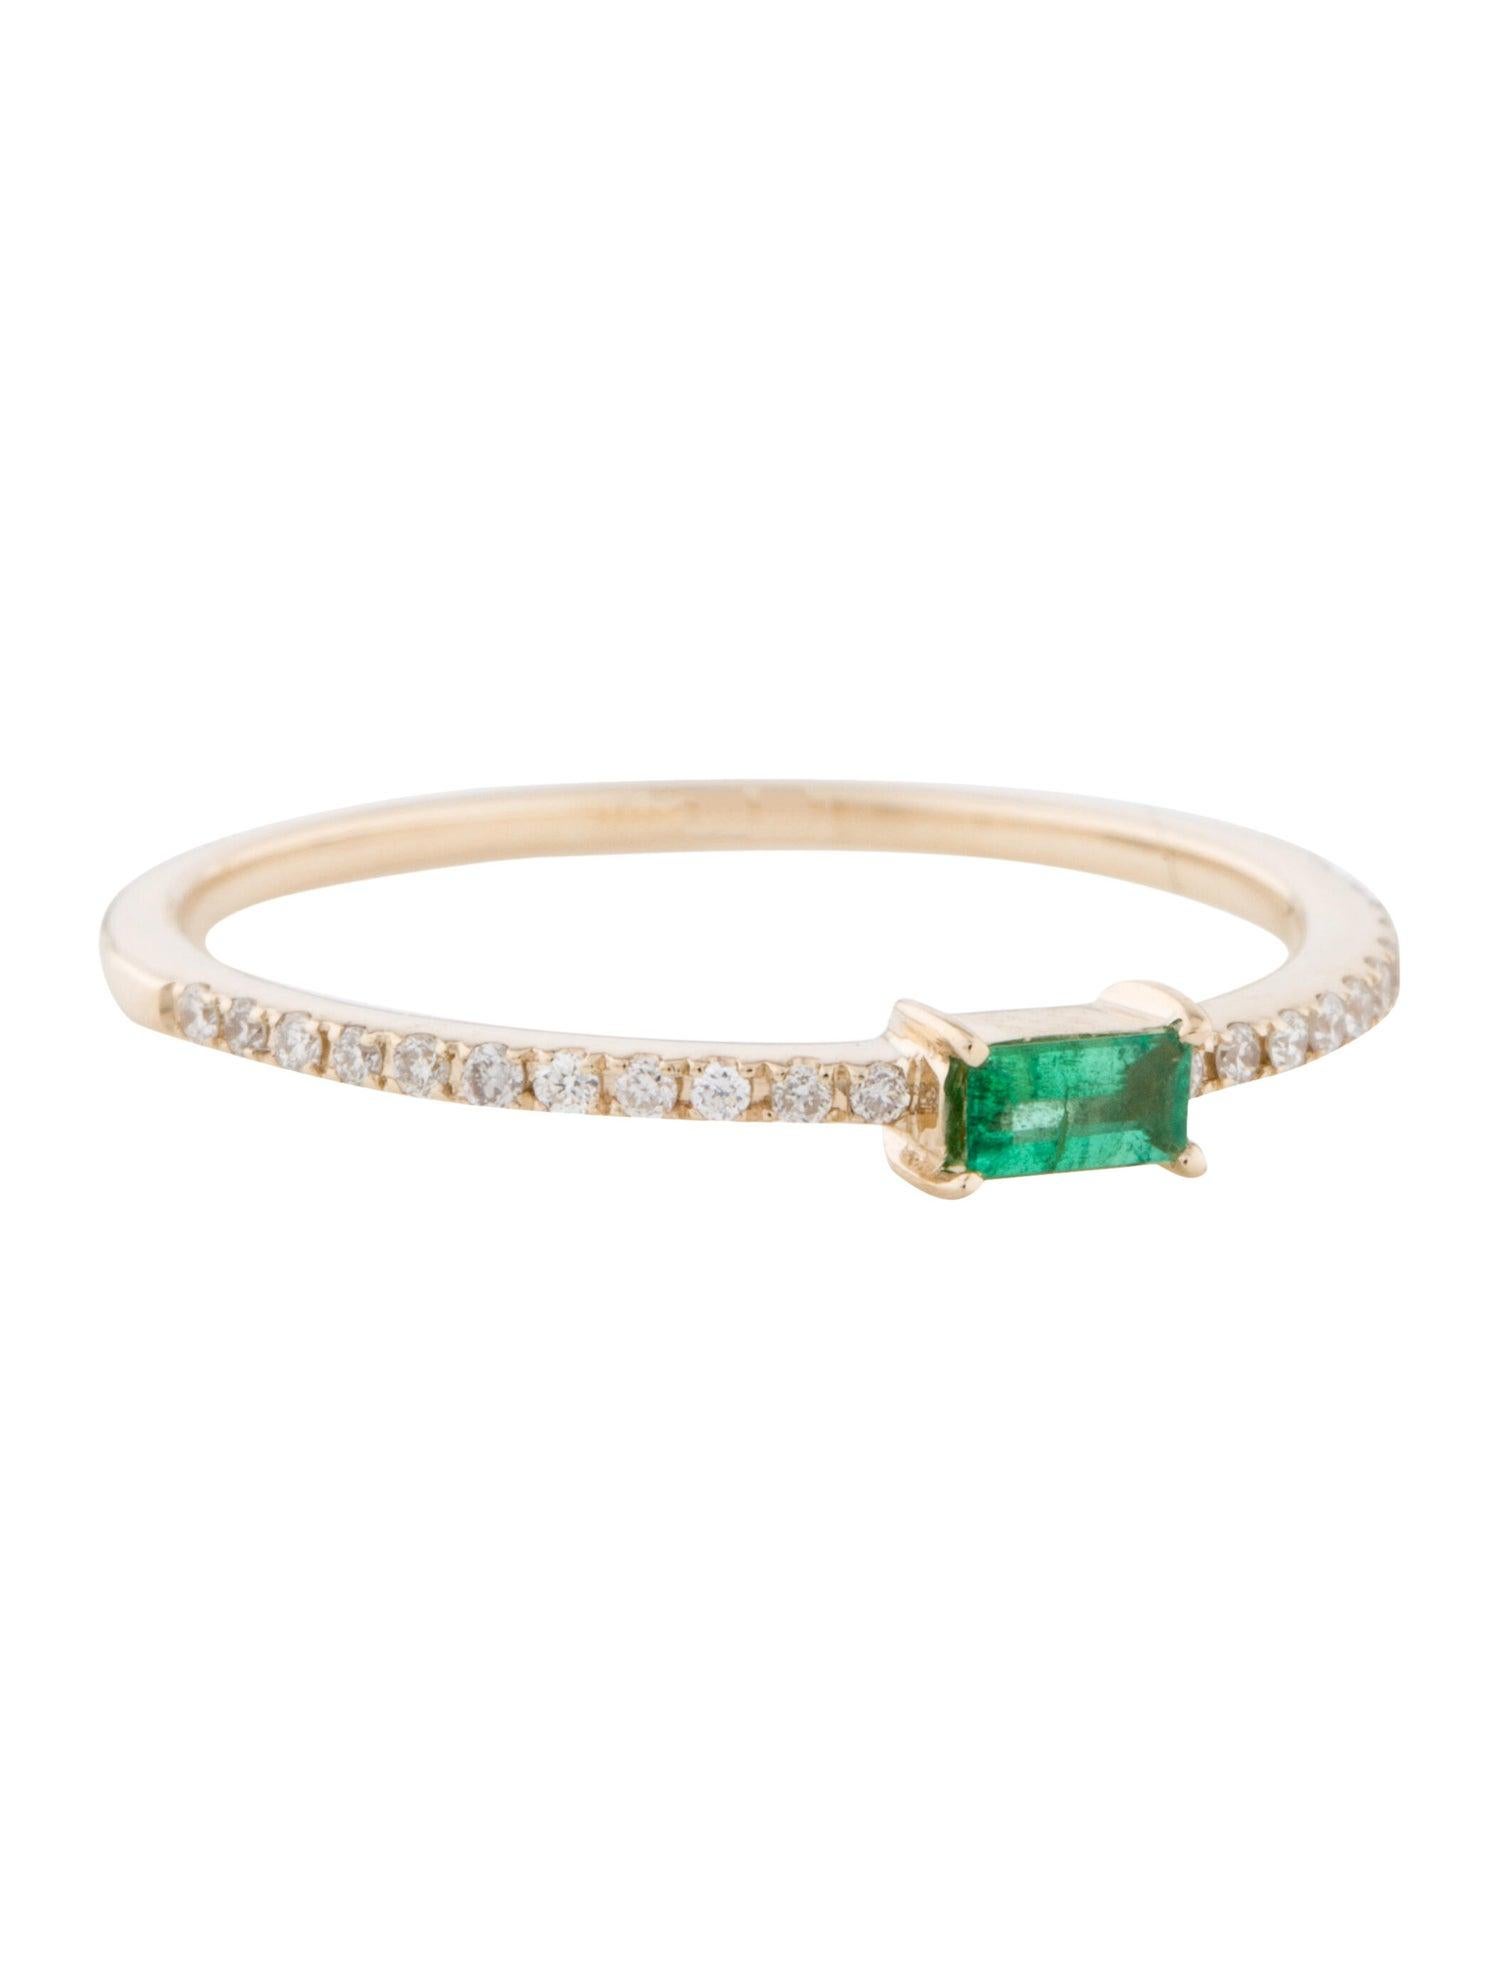 Women's 14 Karat Yellow Gold Green Emerald Stackable Ring Birthstone For Sale